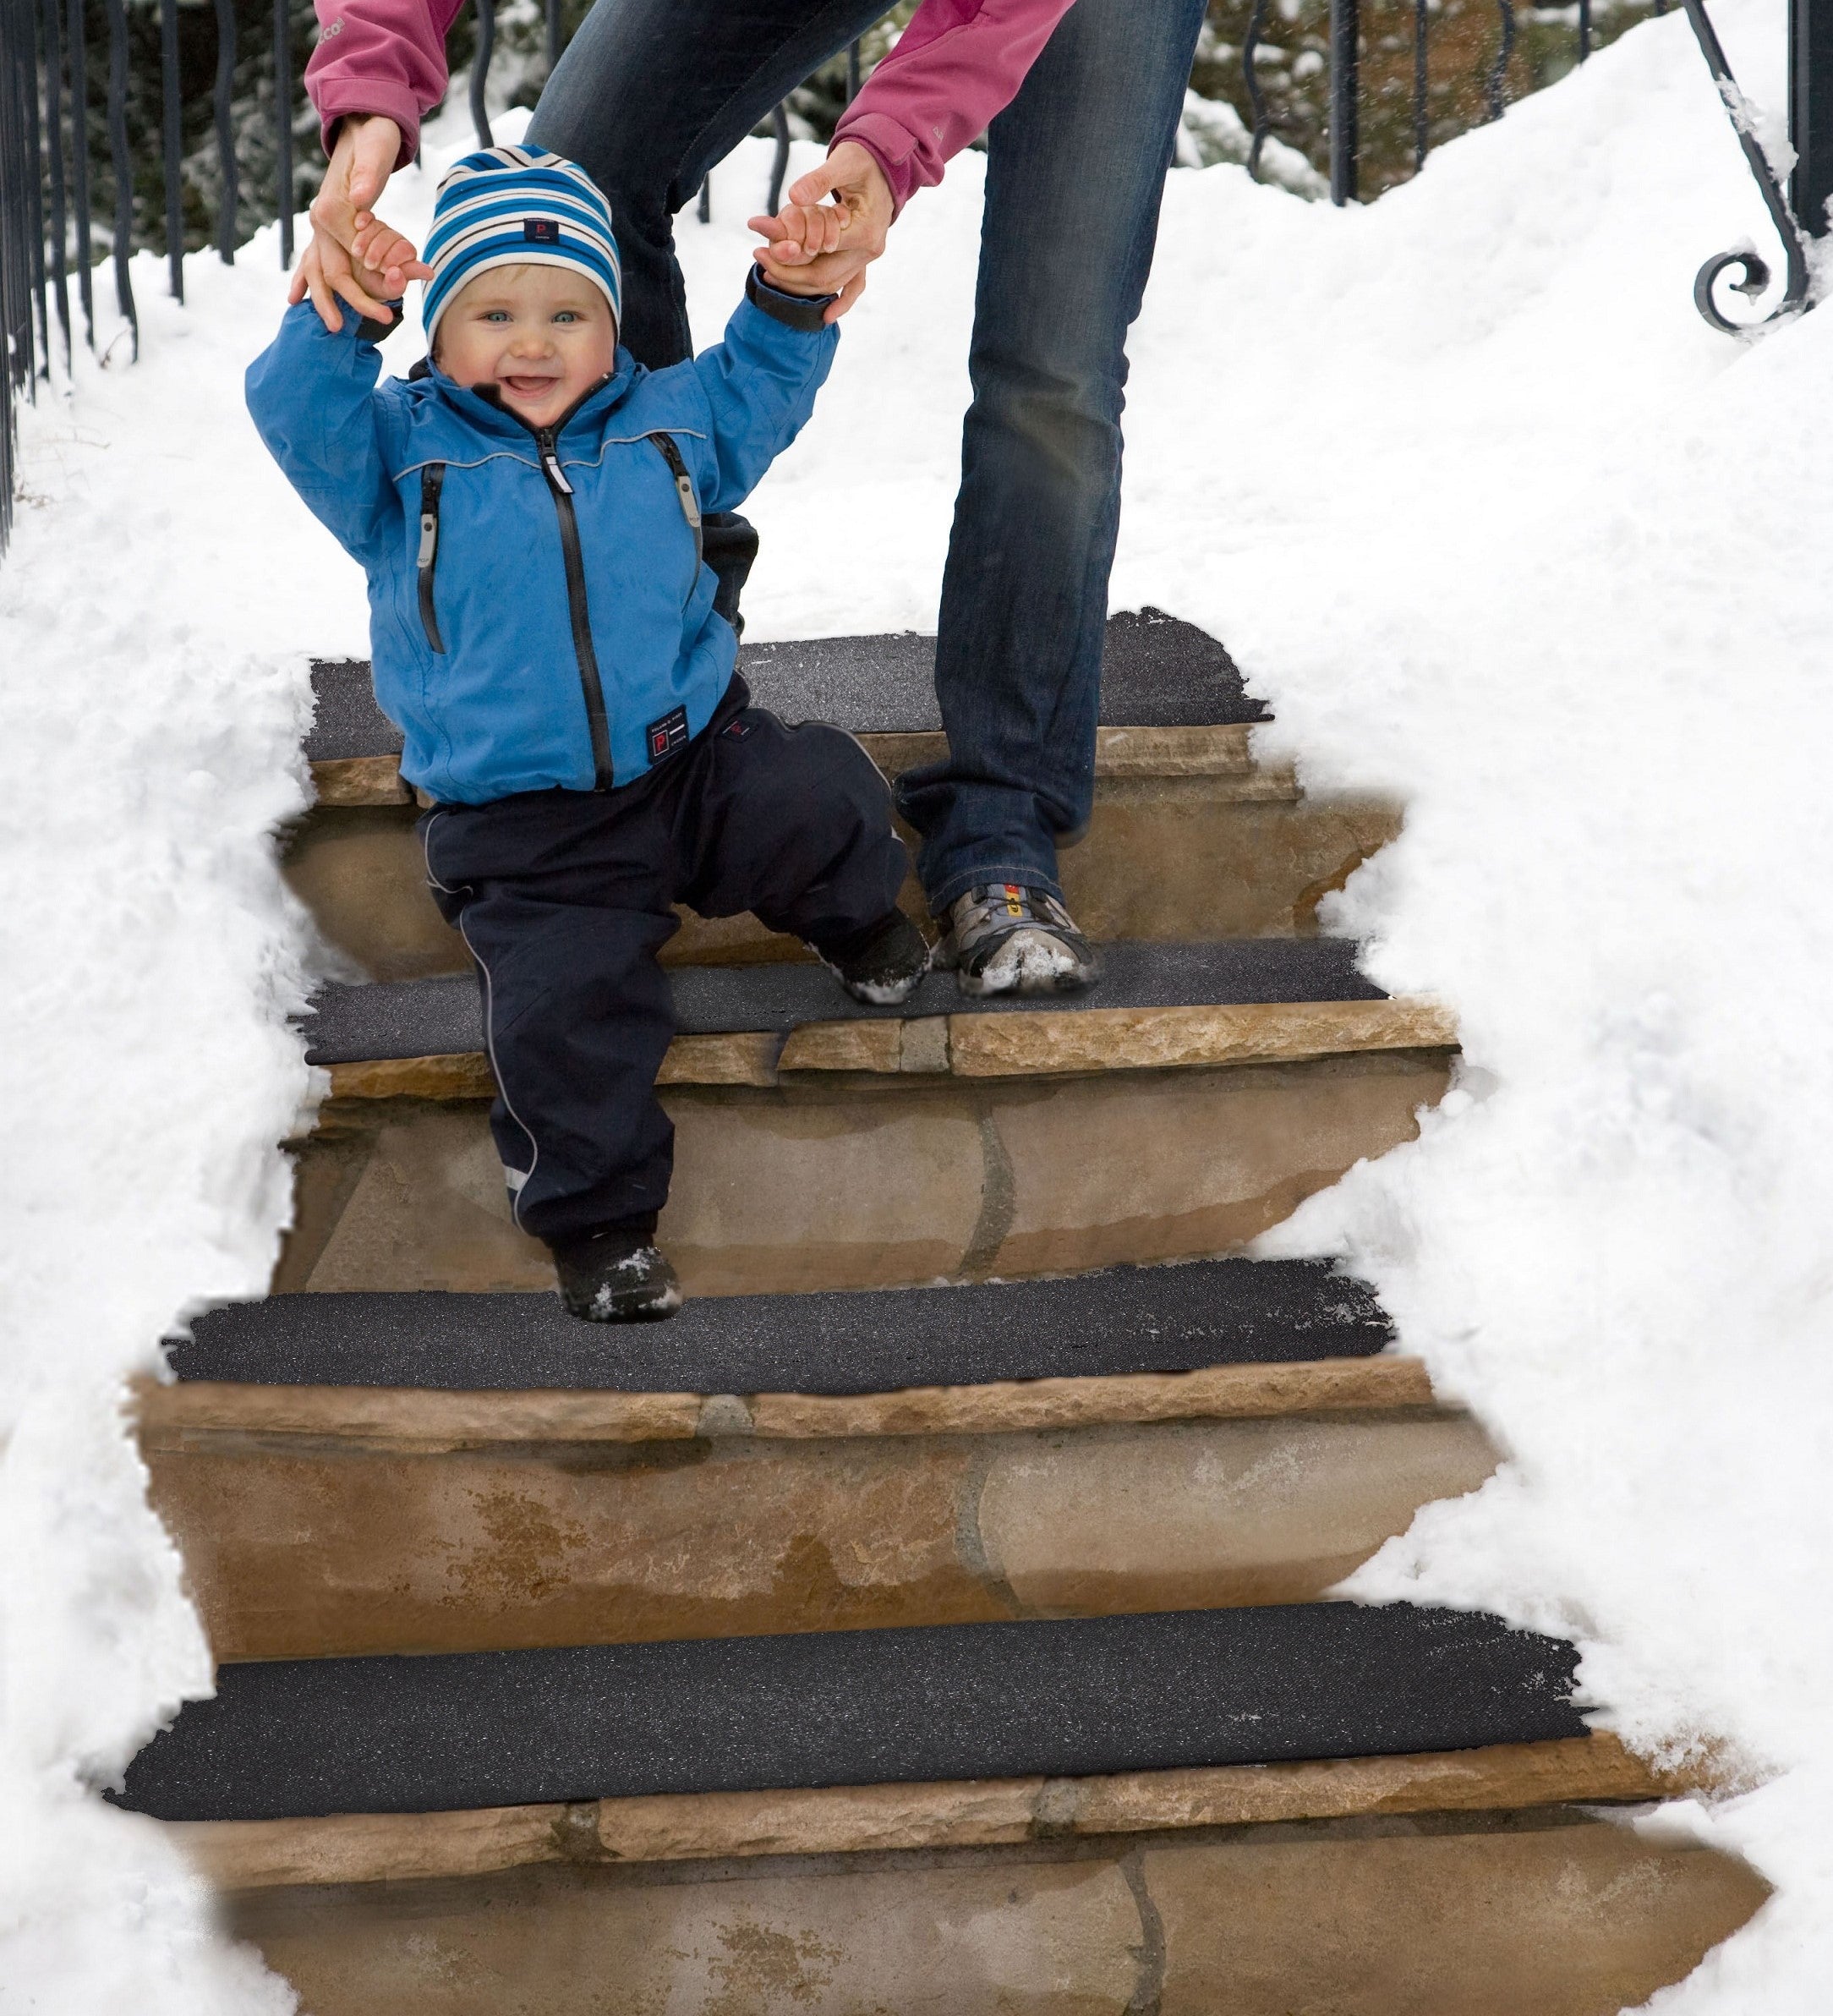 HeatTrak Snow and Ice Melting Mats for Stairs is the ideal way to keep friends and family from slipping on icy steps.